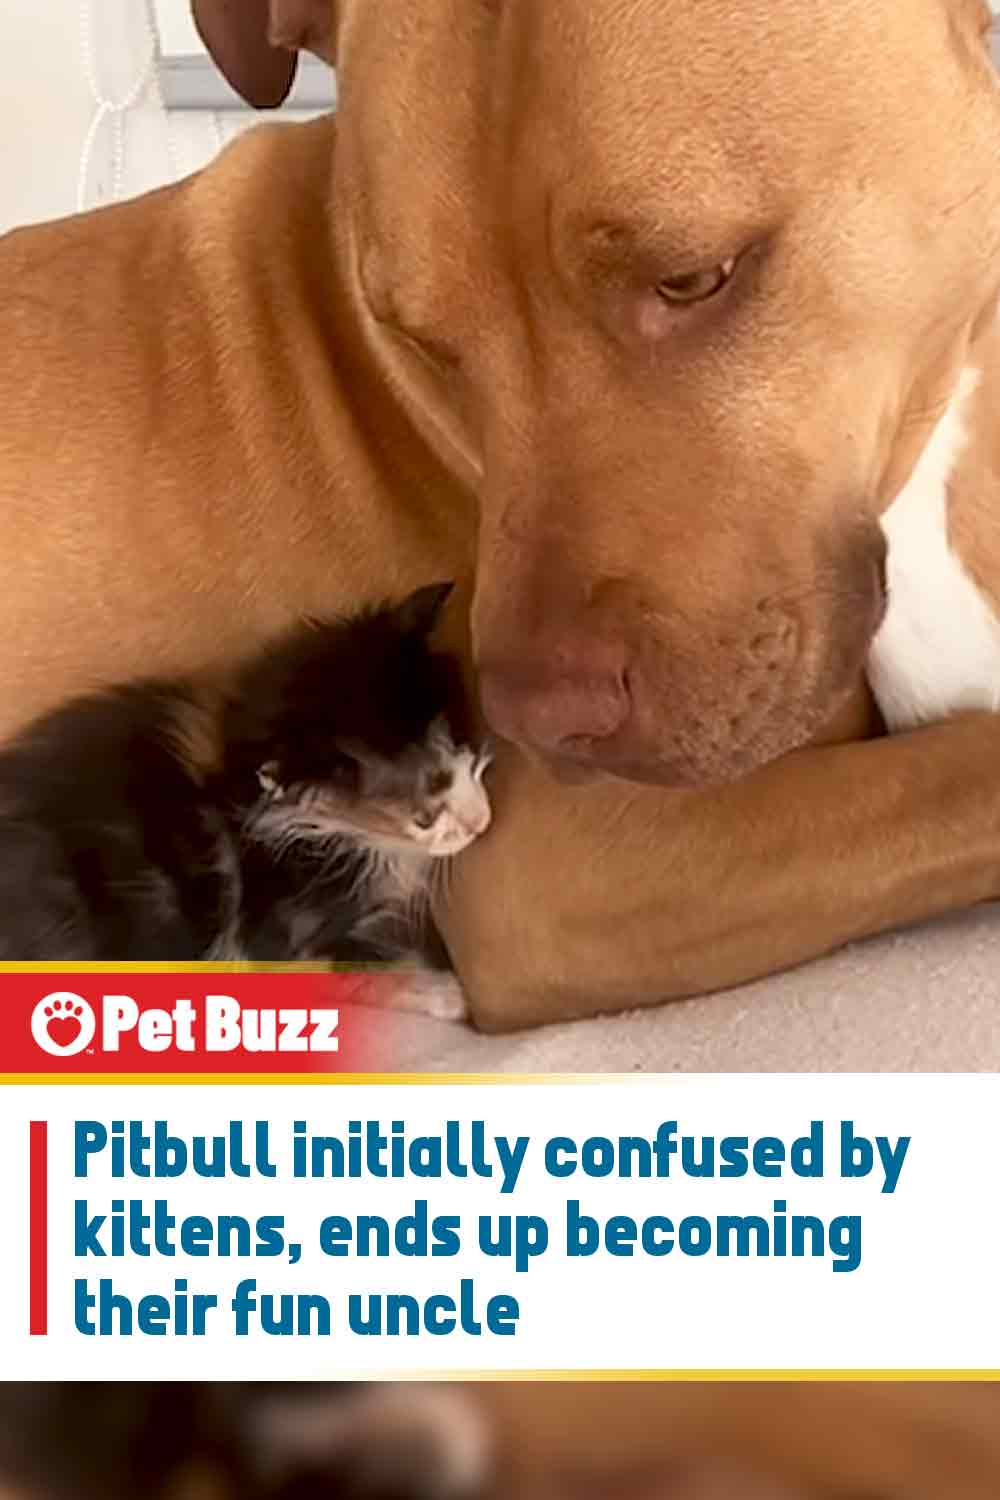 Pitbull initially confused by kittens, ends up becoming their fun uncle